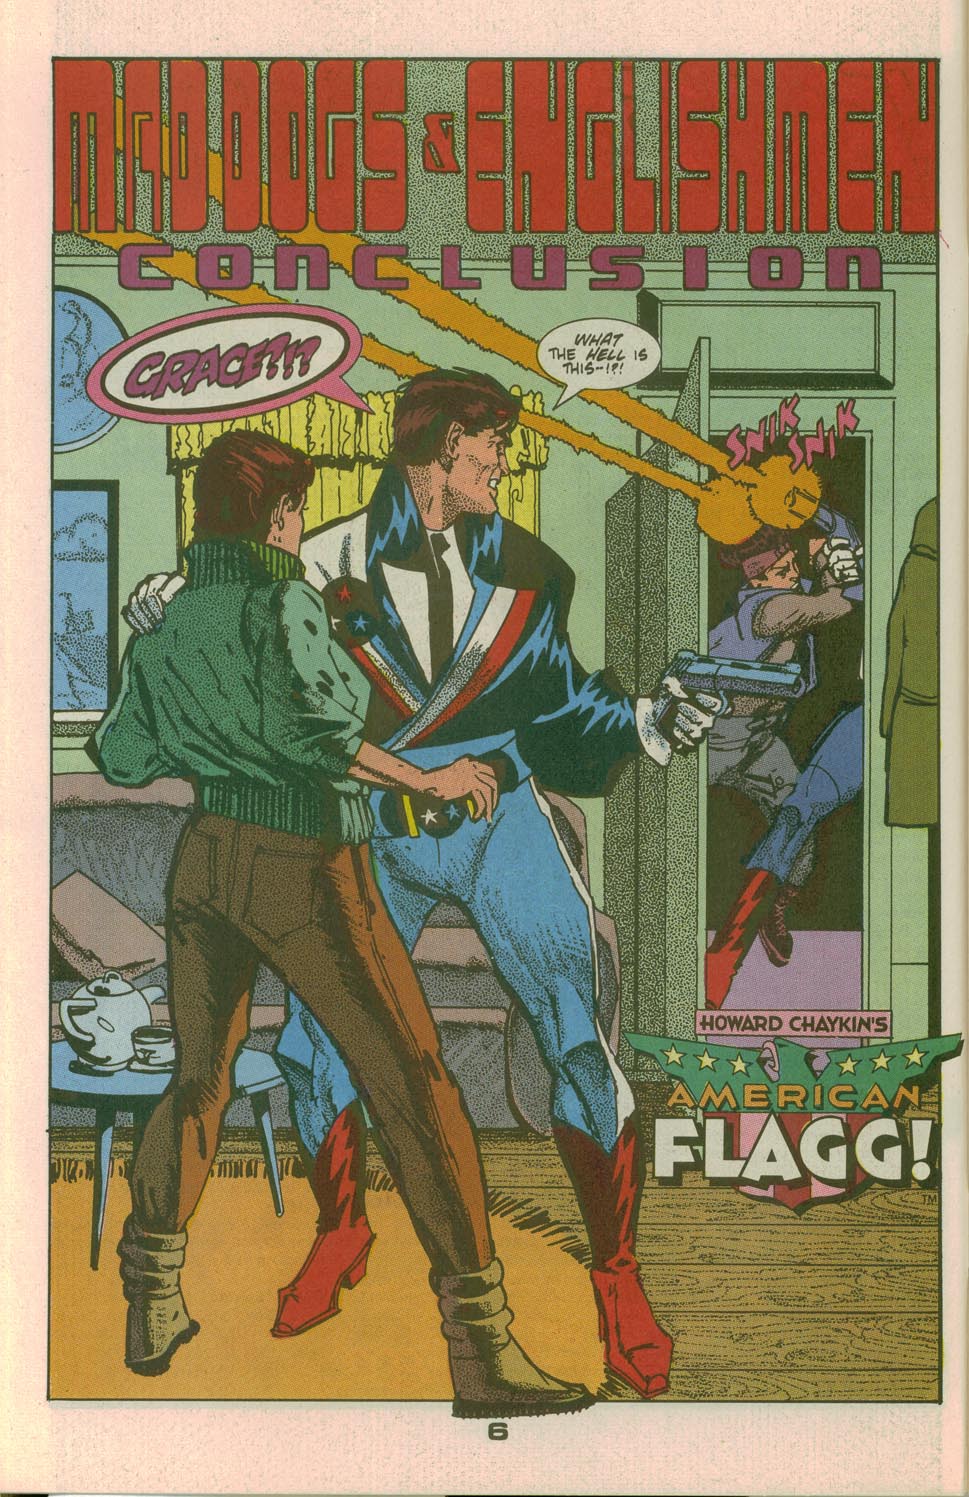 Read online American Flagg! comic -  Issue #26 - 8